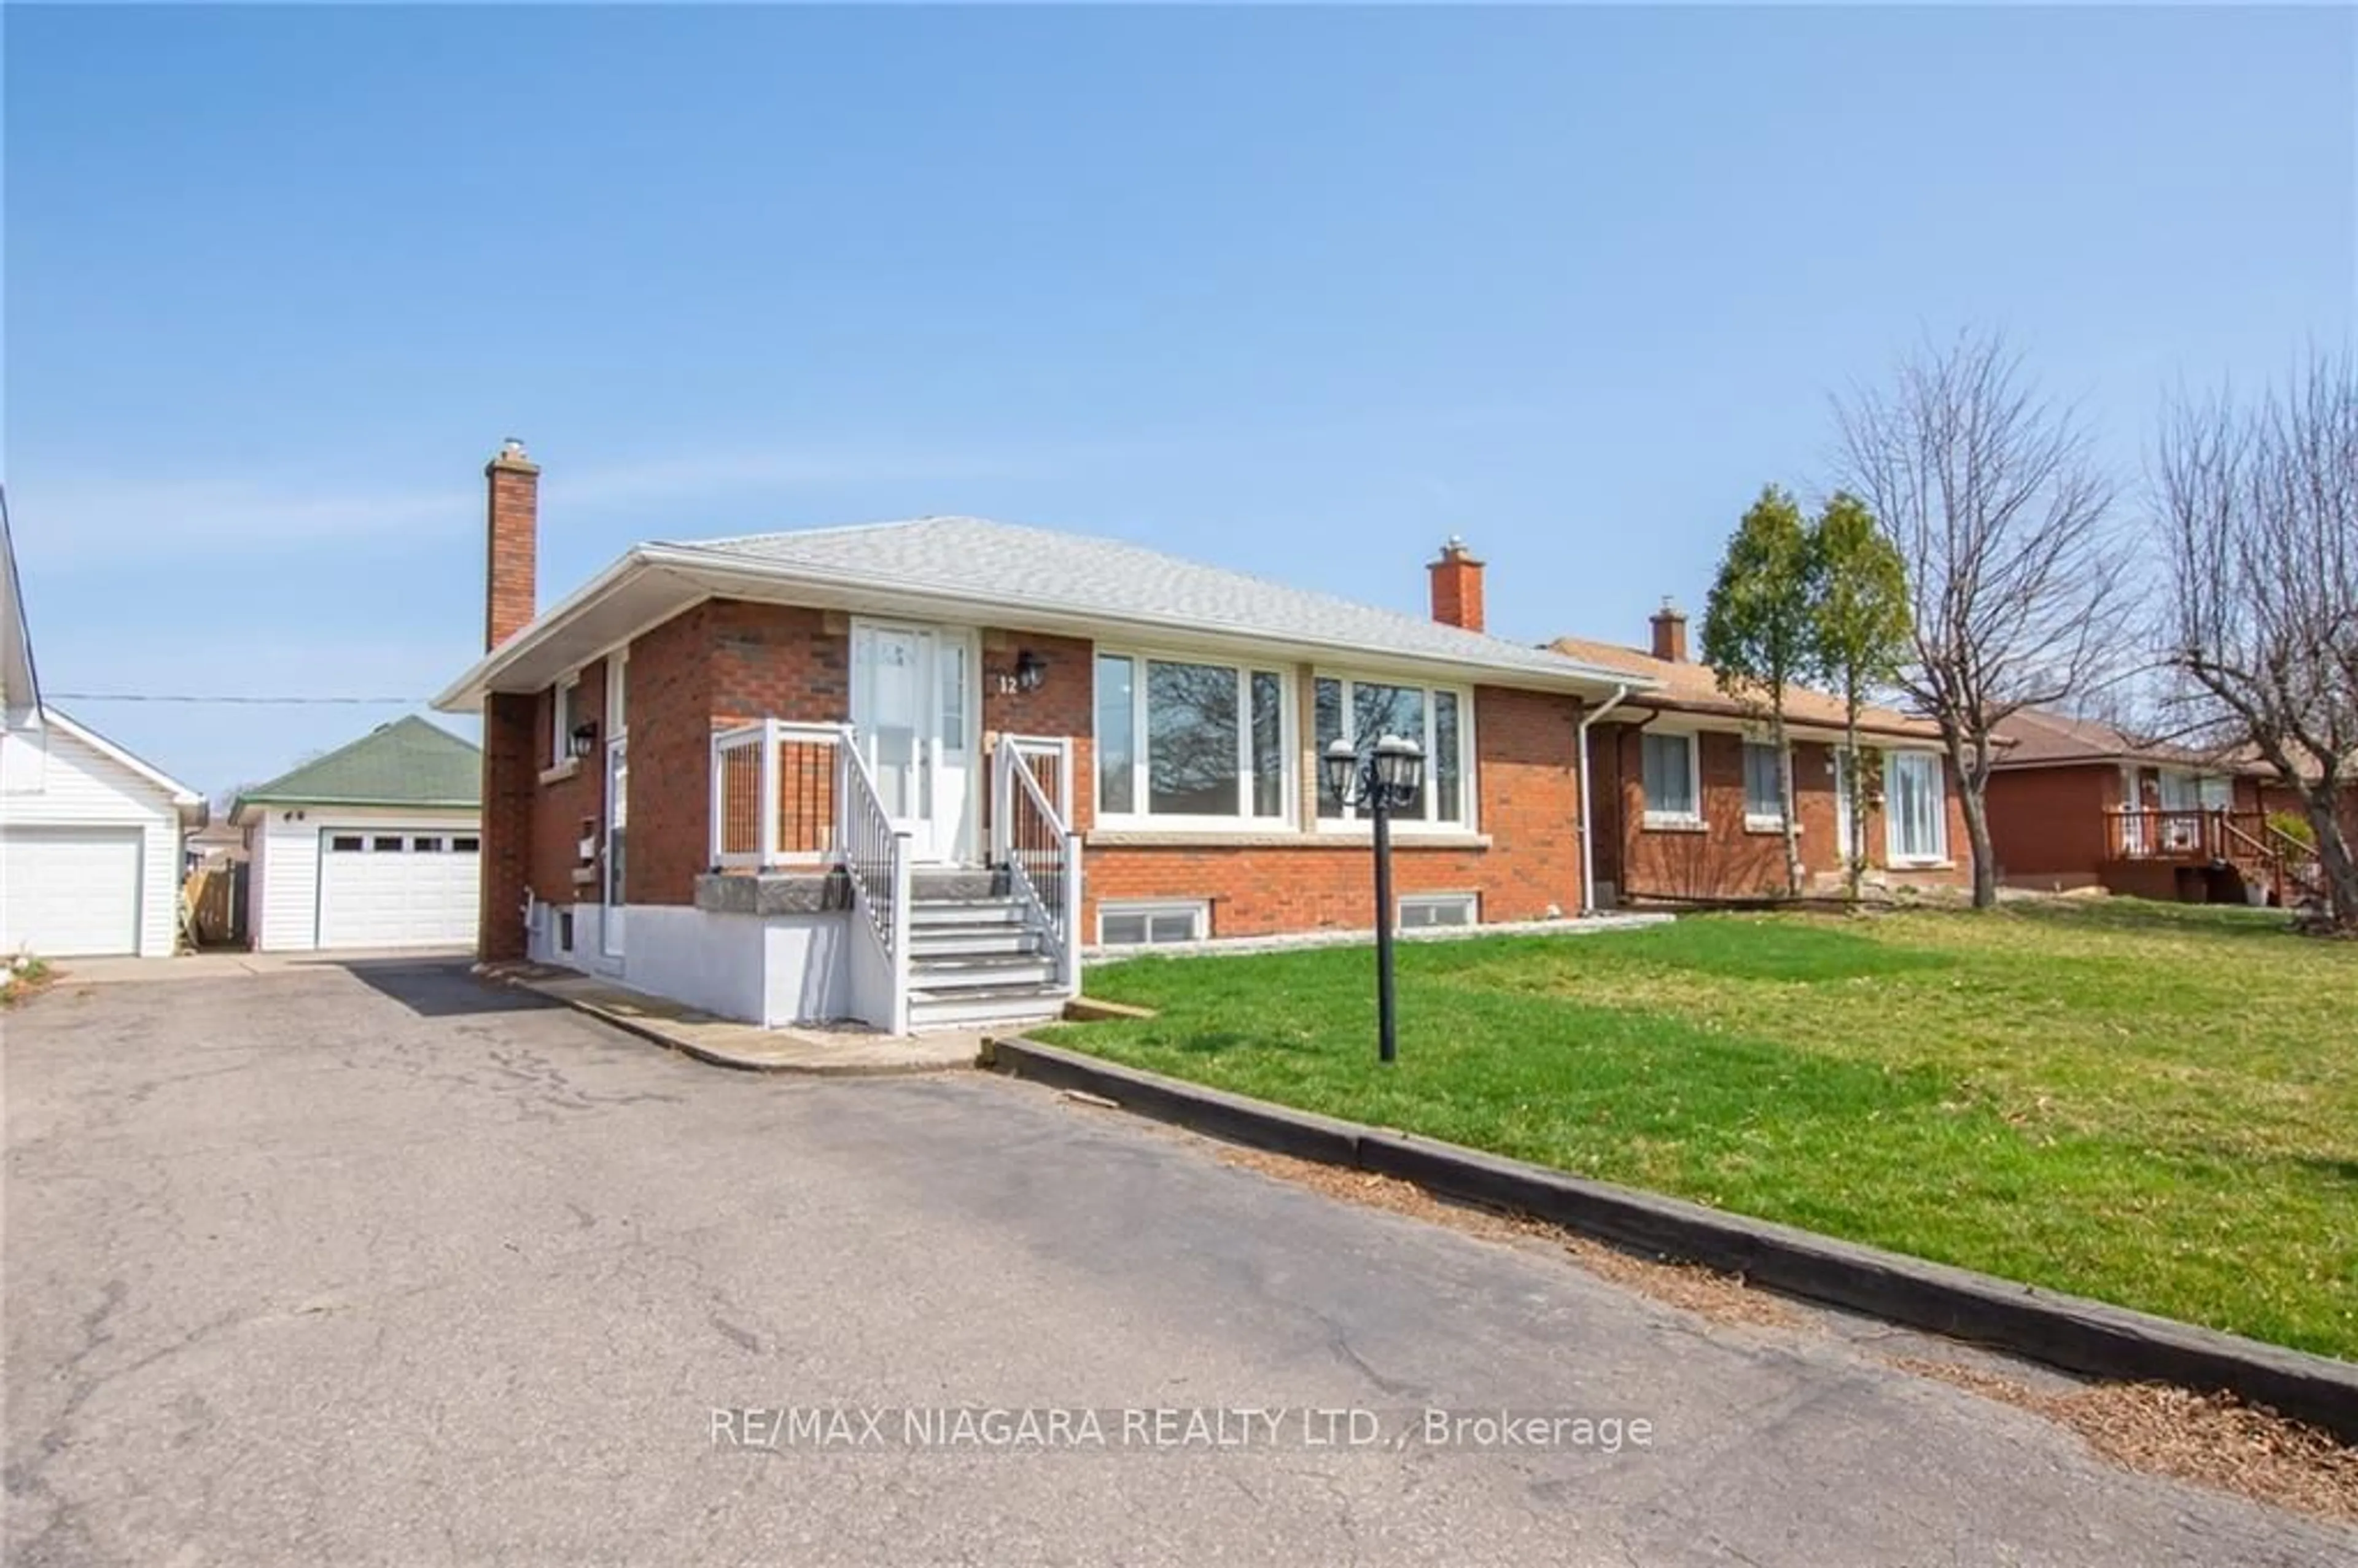 Frontside or backside of a home for 12 Milton Rd, St. Catharines Ontario L2P 3E8